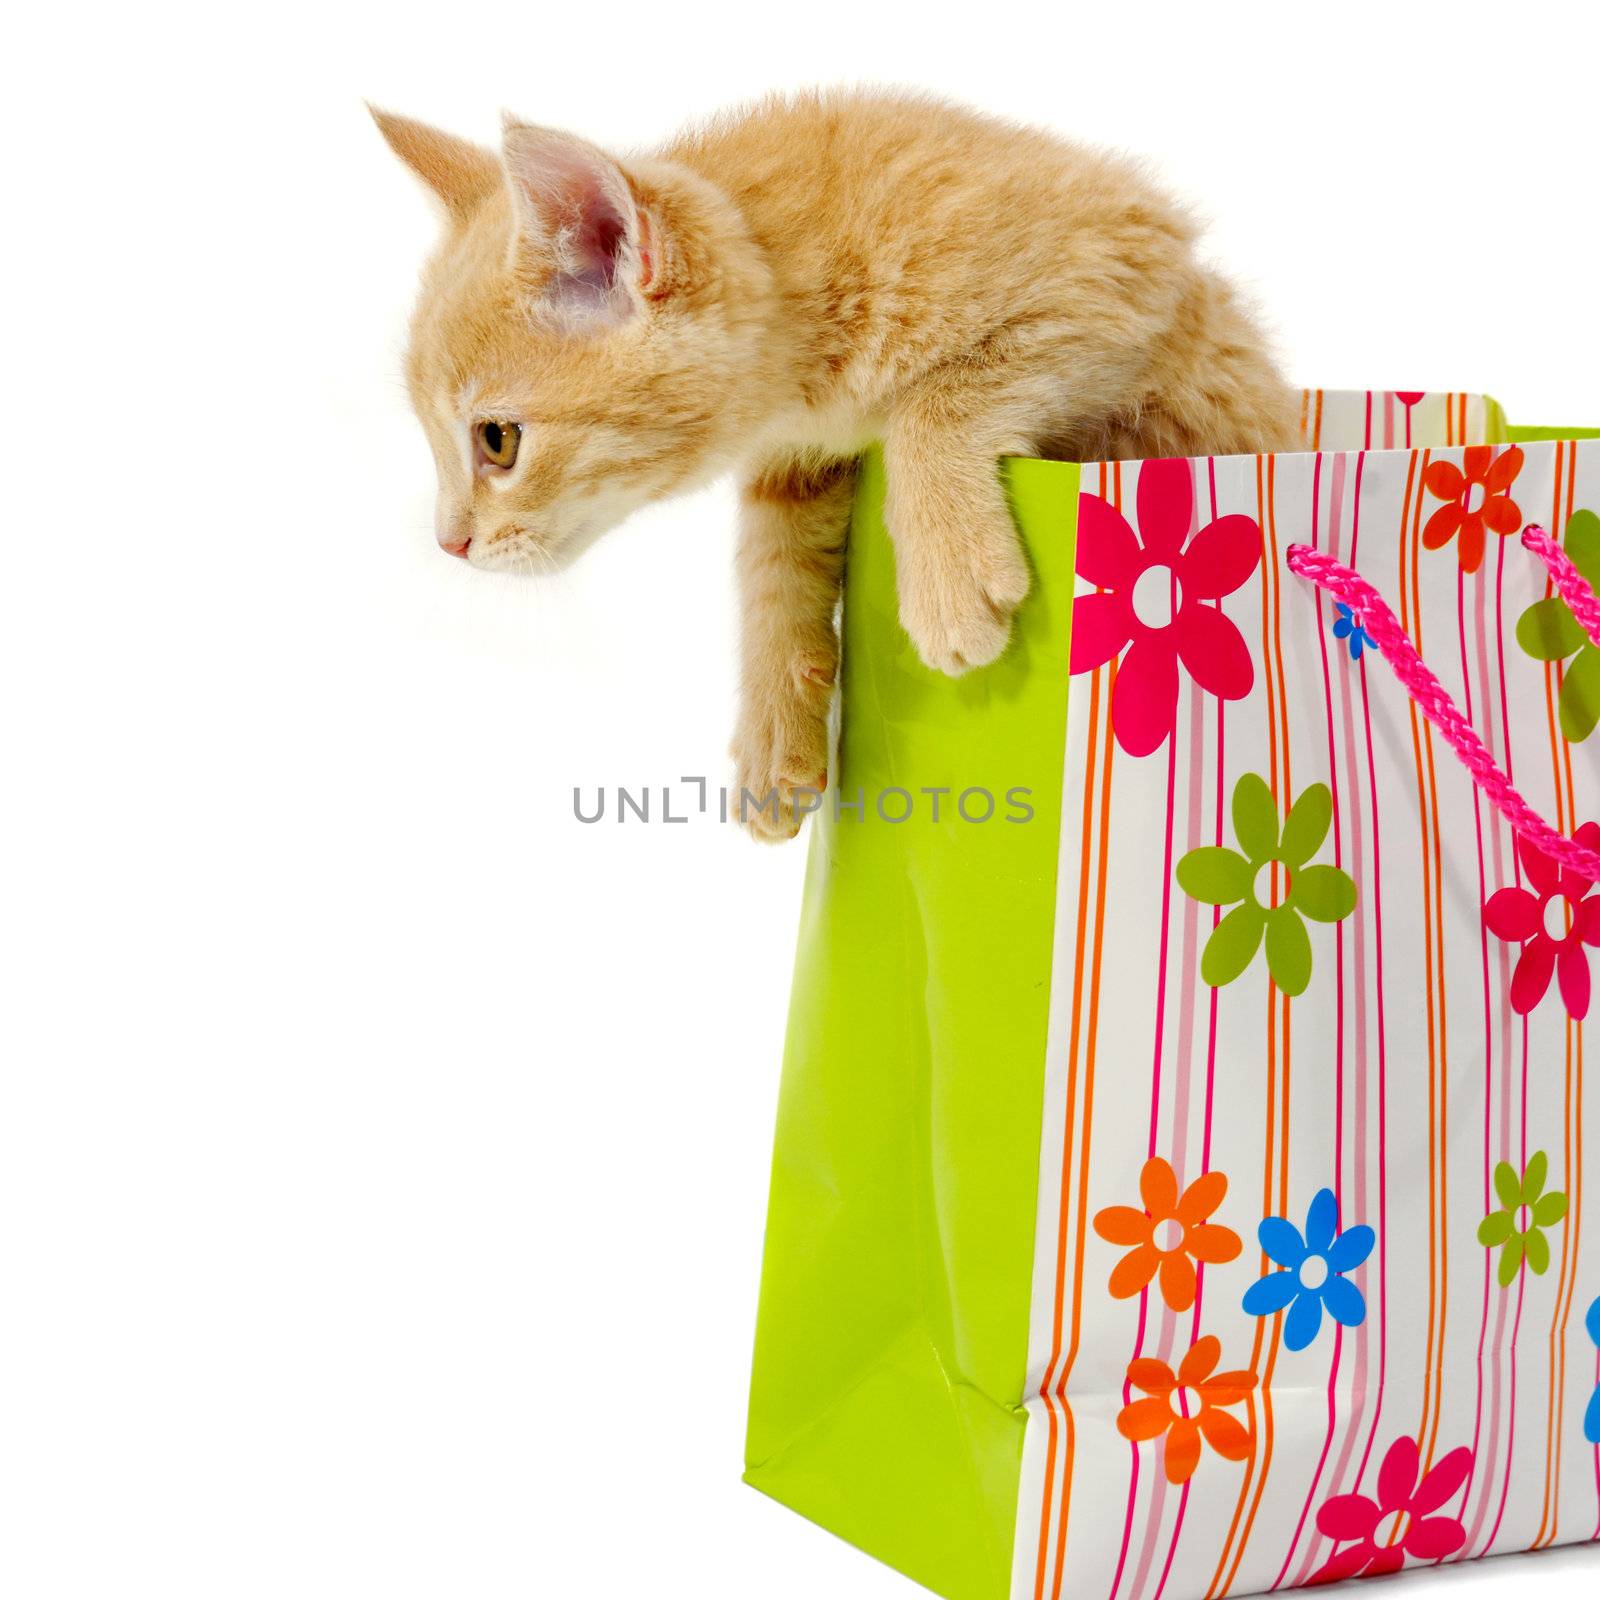 Kitten and shopping bag by cfoto